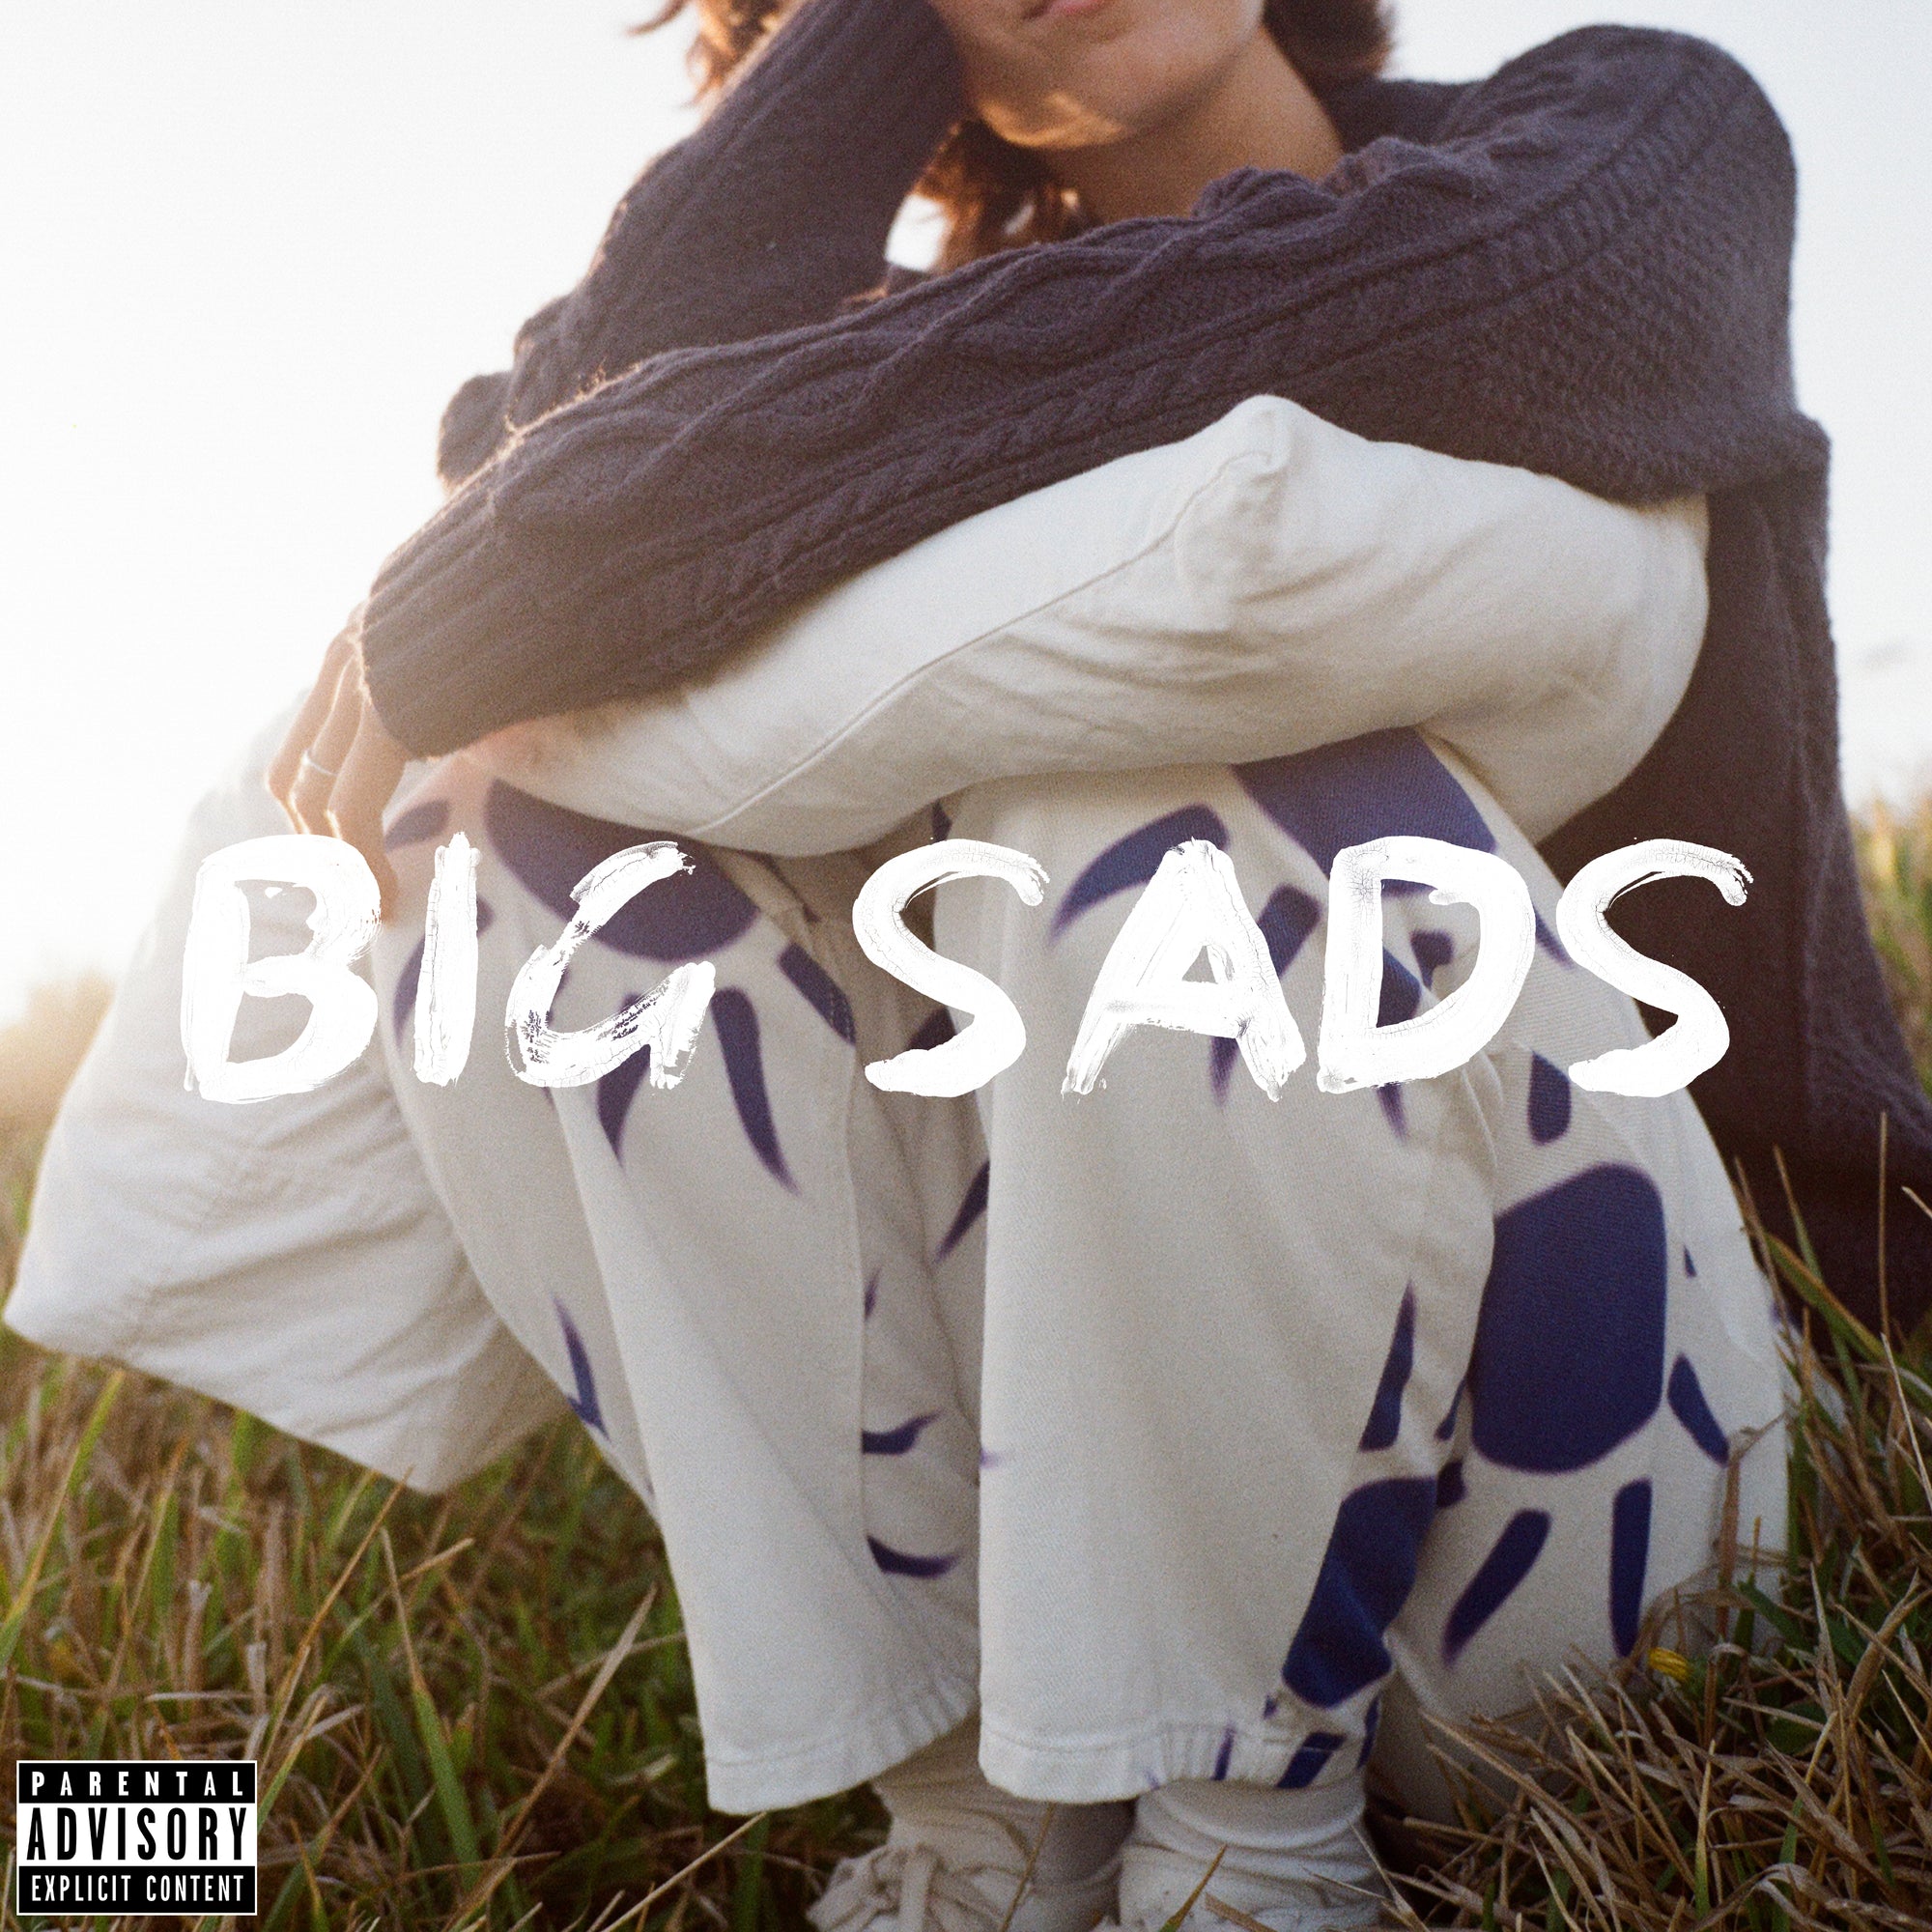 St. South Channels Deep Emotions in Her New EP, Sharing New Video For 'BIG SADS'